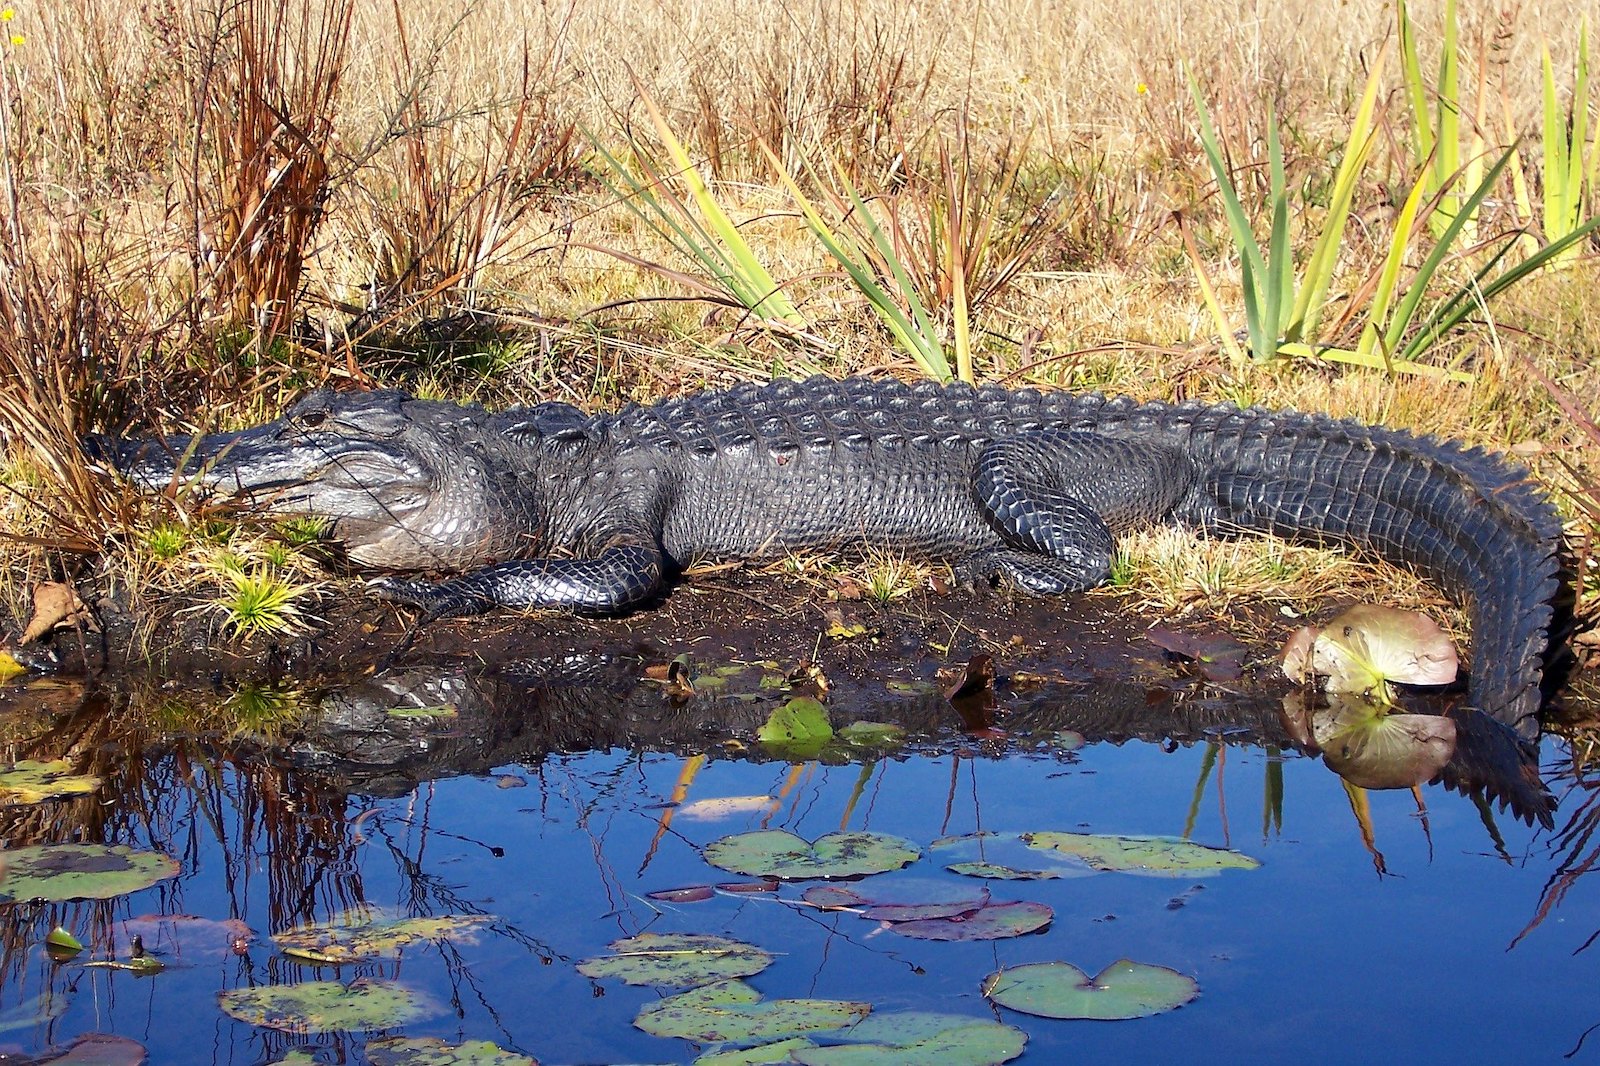 a large alligator looks off to the left in front of a pool of water with lily pads